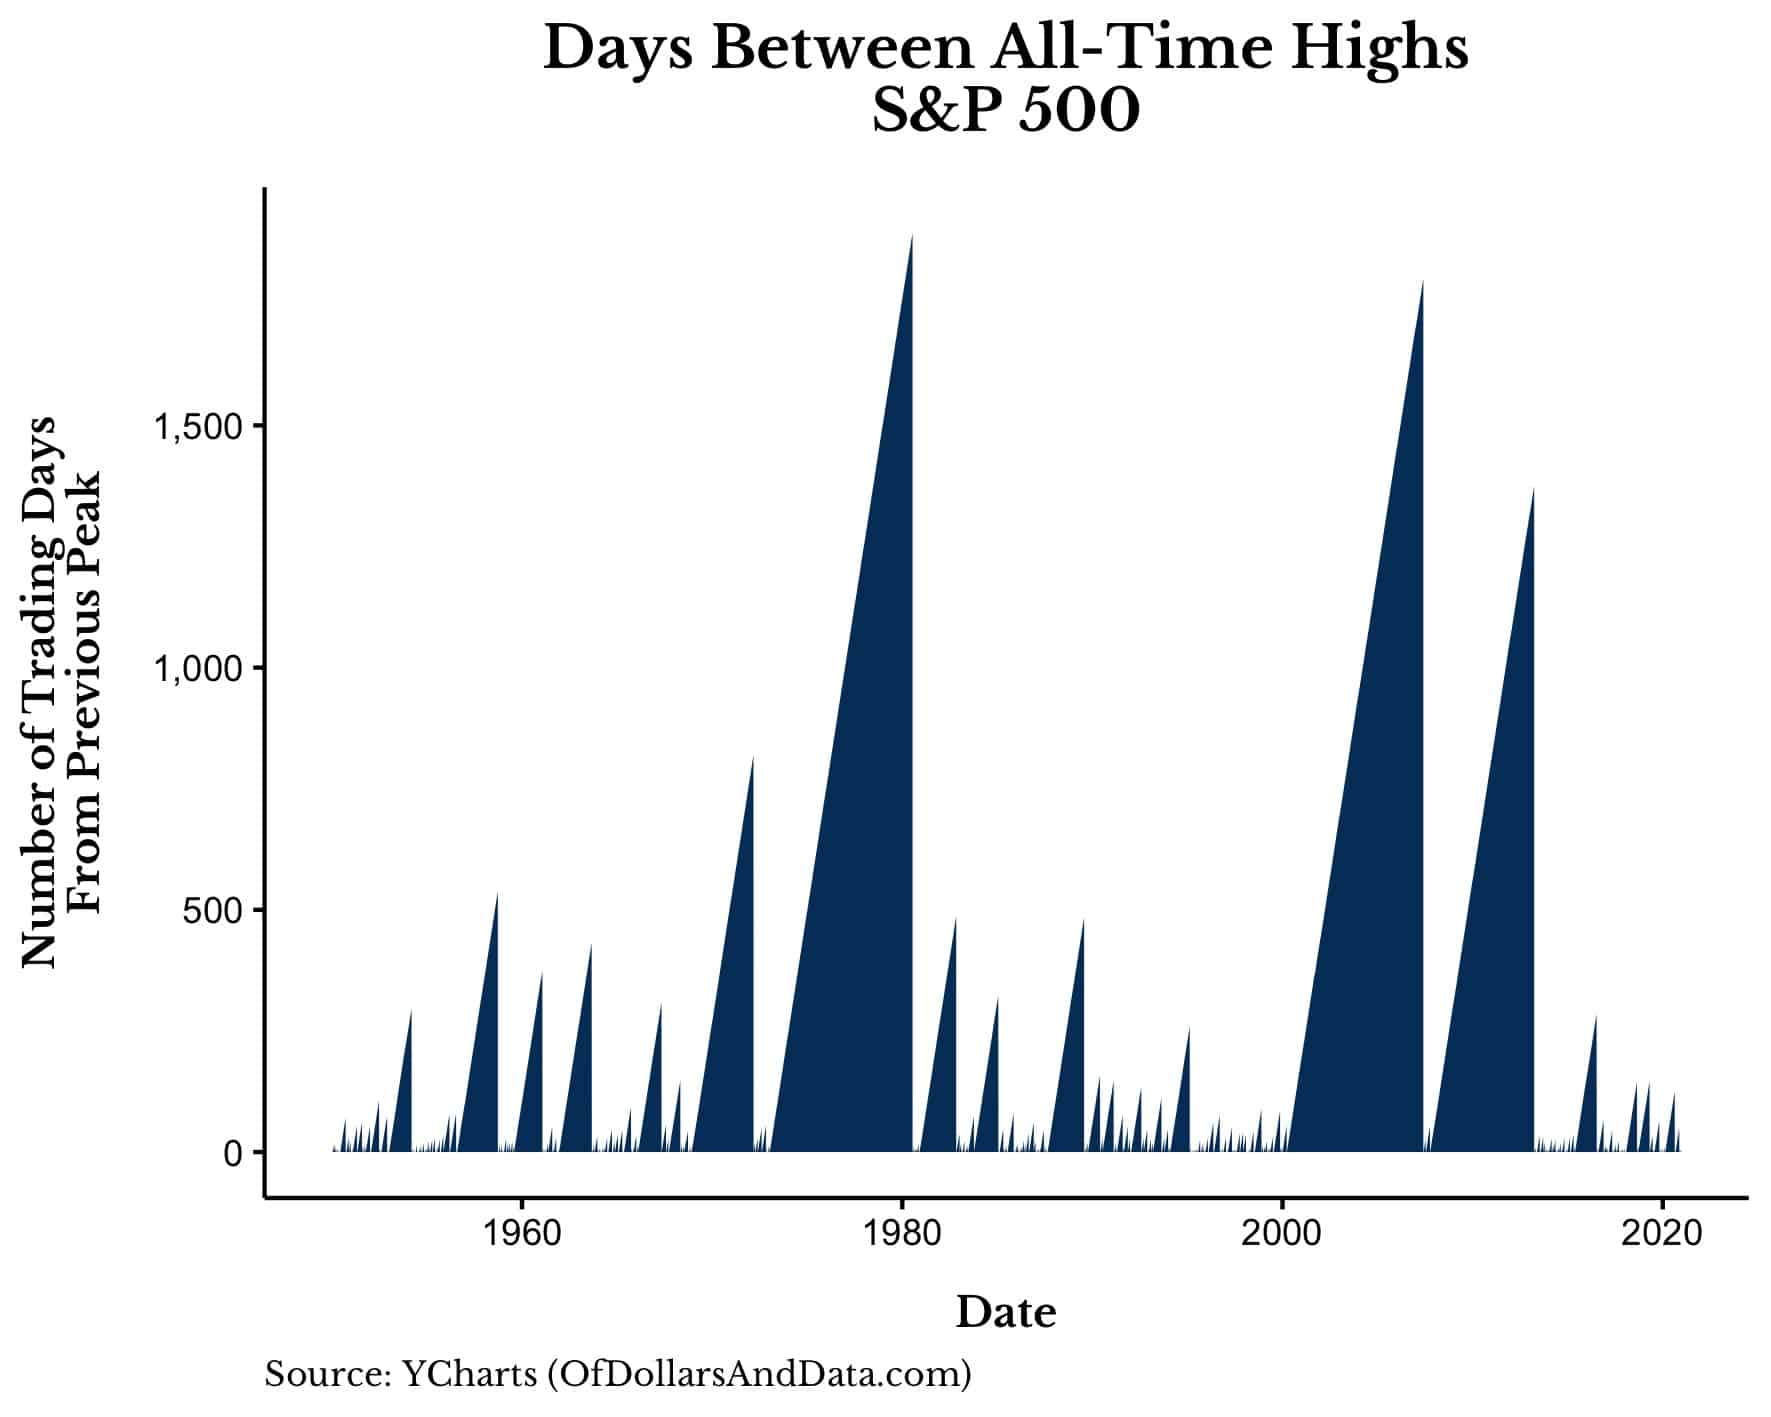 Days Between All-Time Highs for the S&P 500